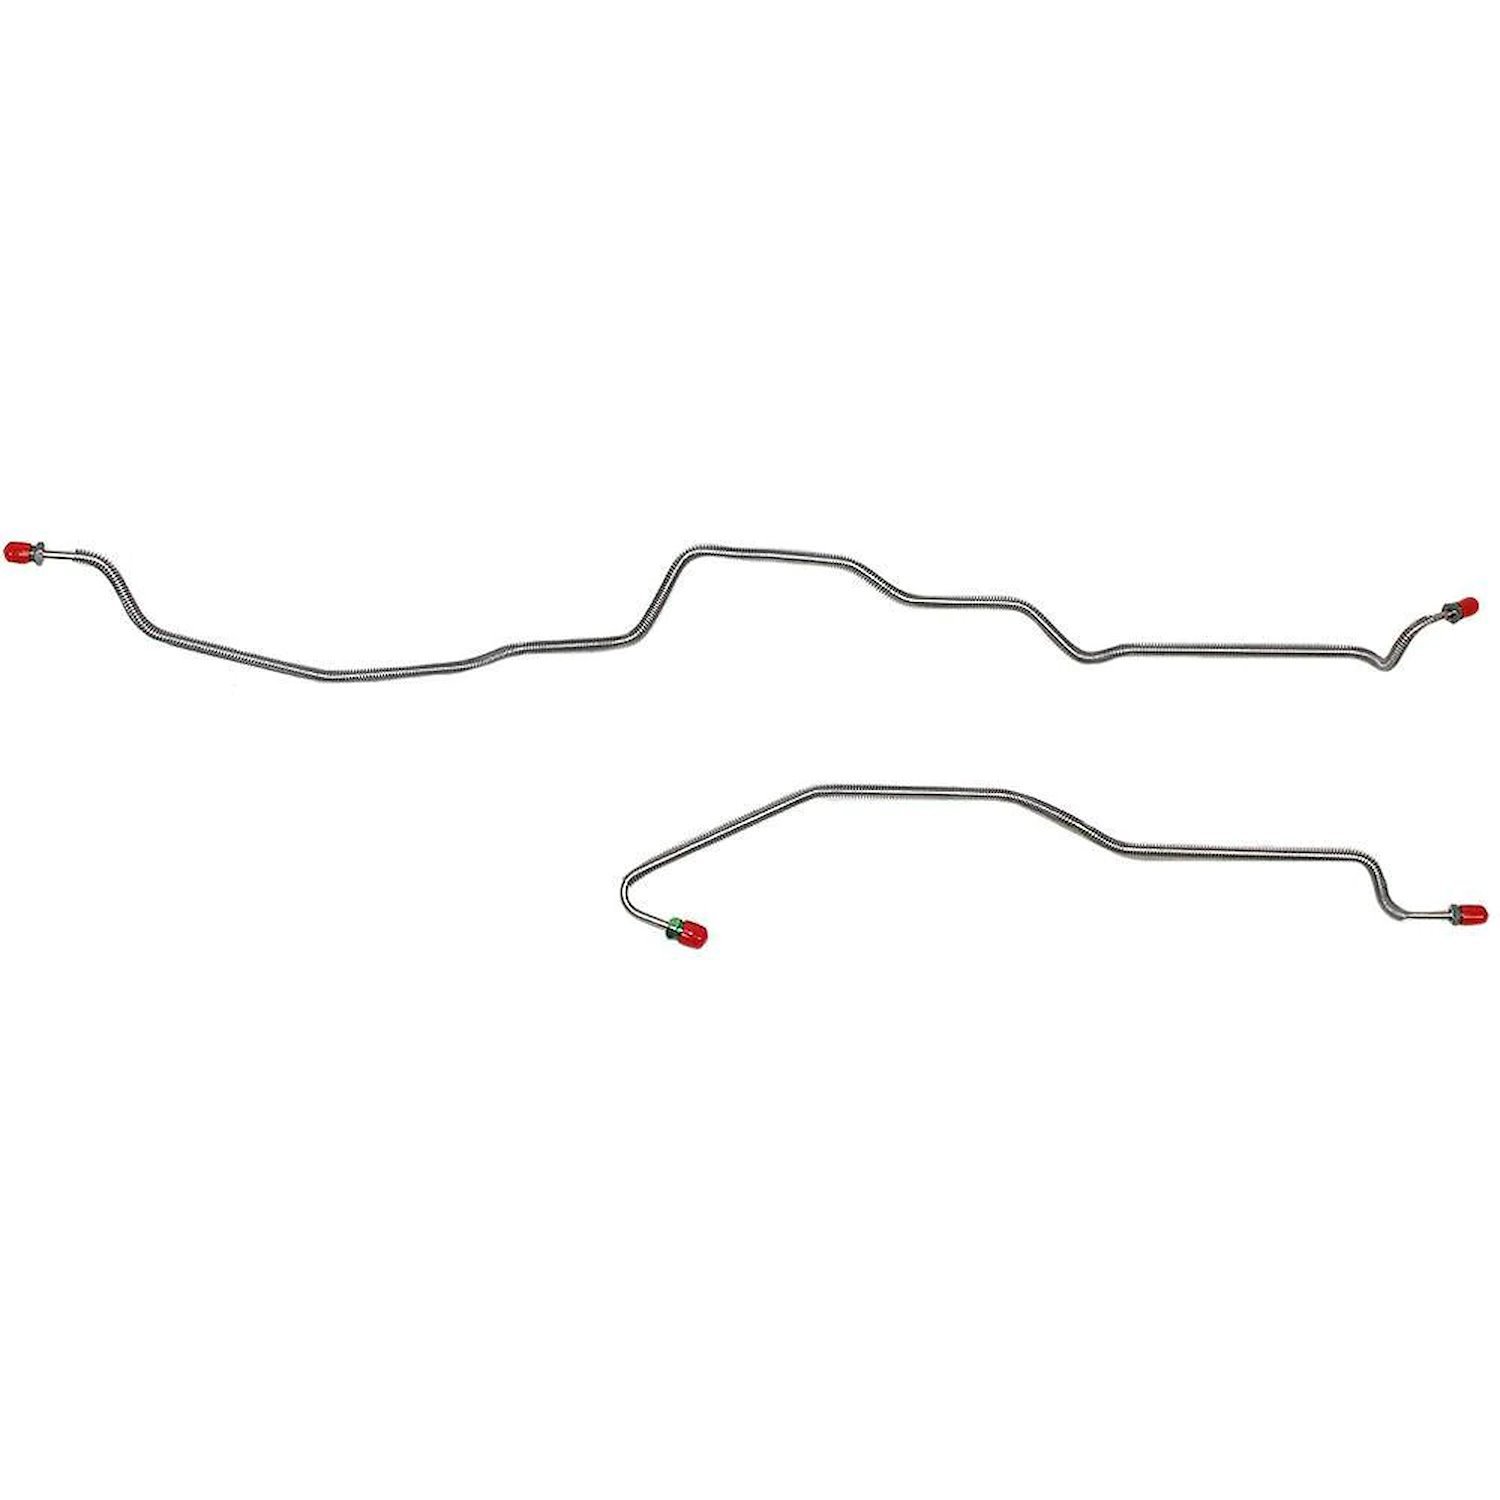 Rear Axle Brake Line Set for 1995-1997 Chevy Camaro, Pontiac Trans Am without Traction Control [2-PC, Steel]